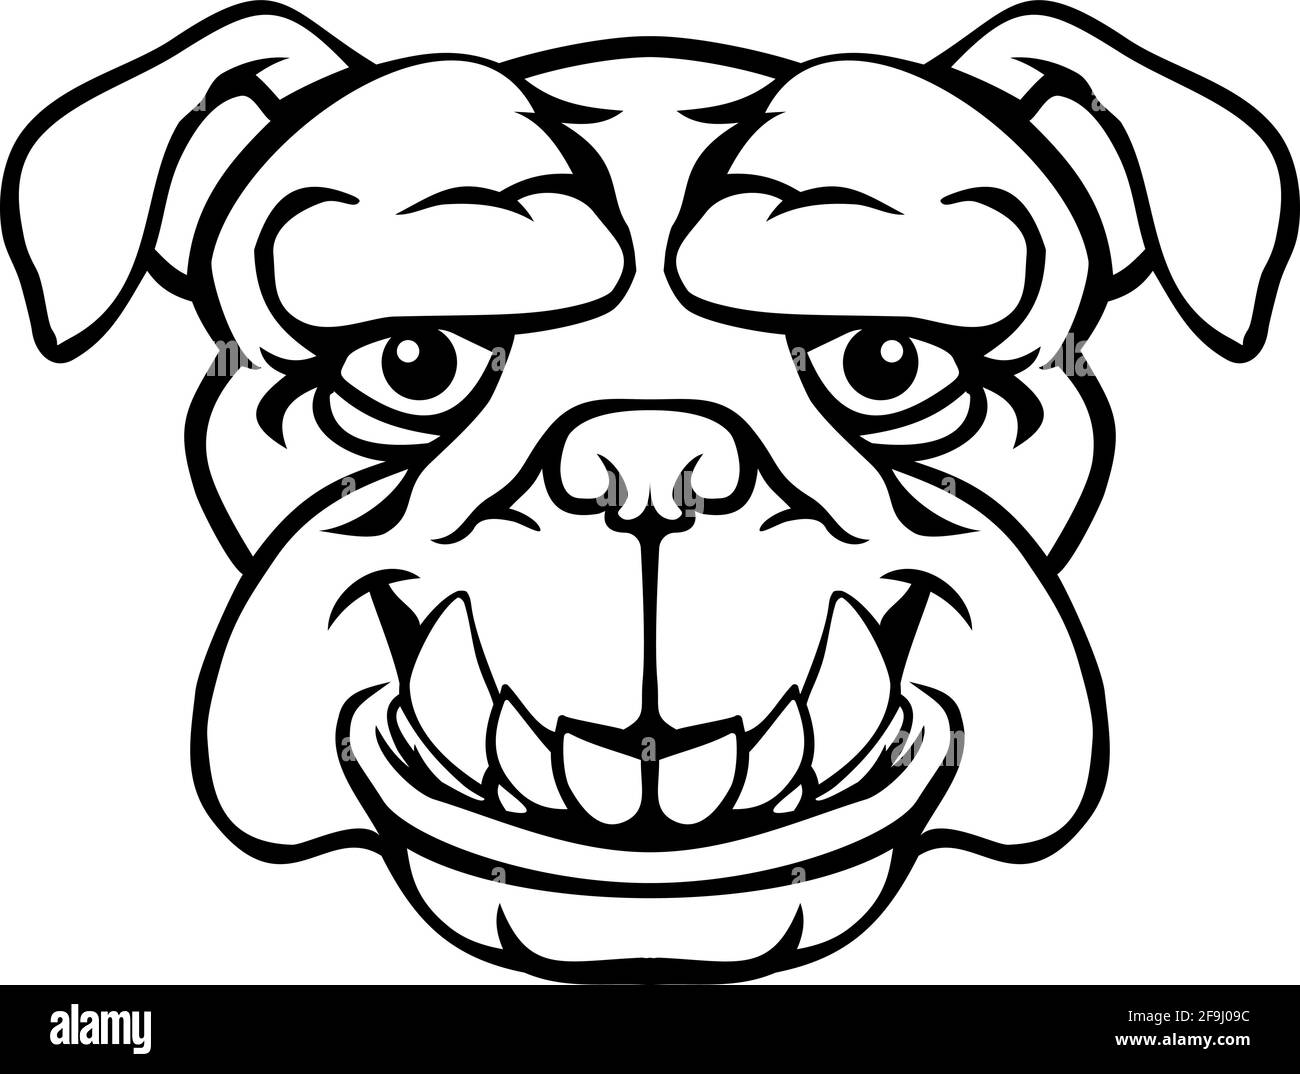 Cute French Bulldog Sketch Drawn Puppy Stock Vector (Royalty Free)  1608784906 | Shutterstock